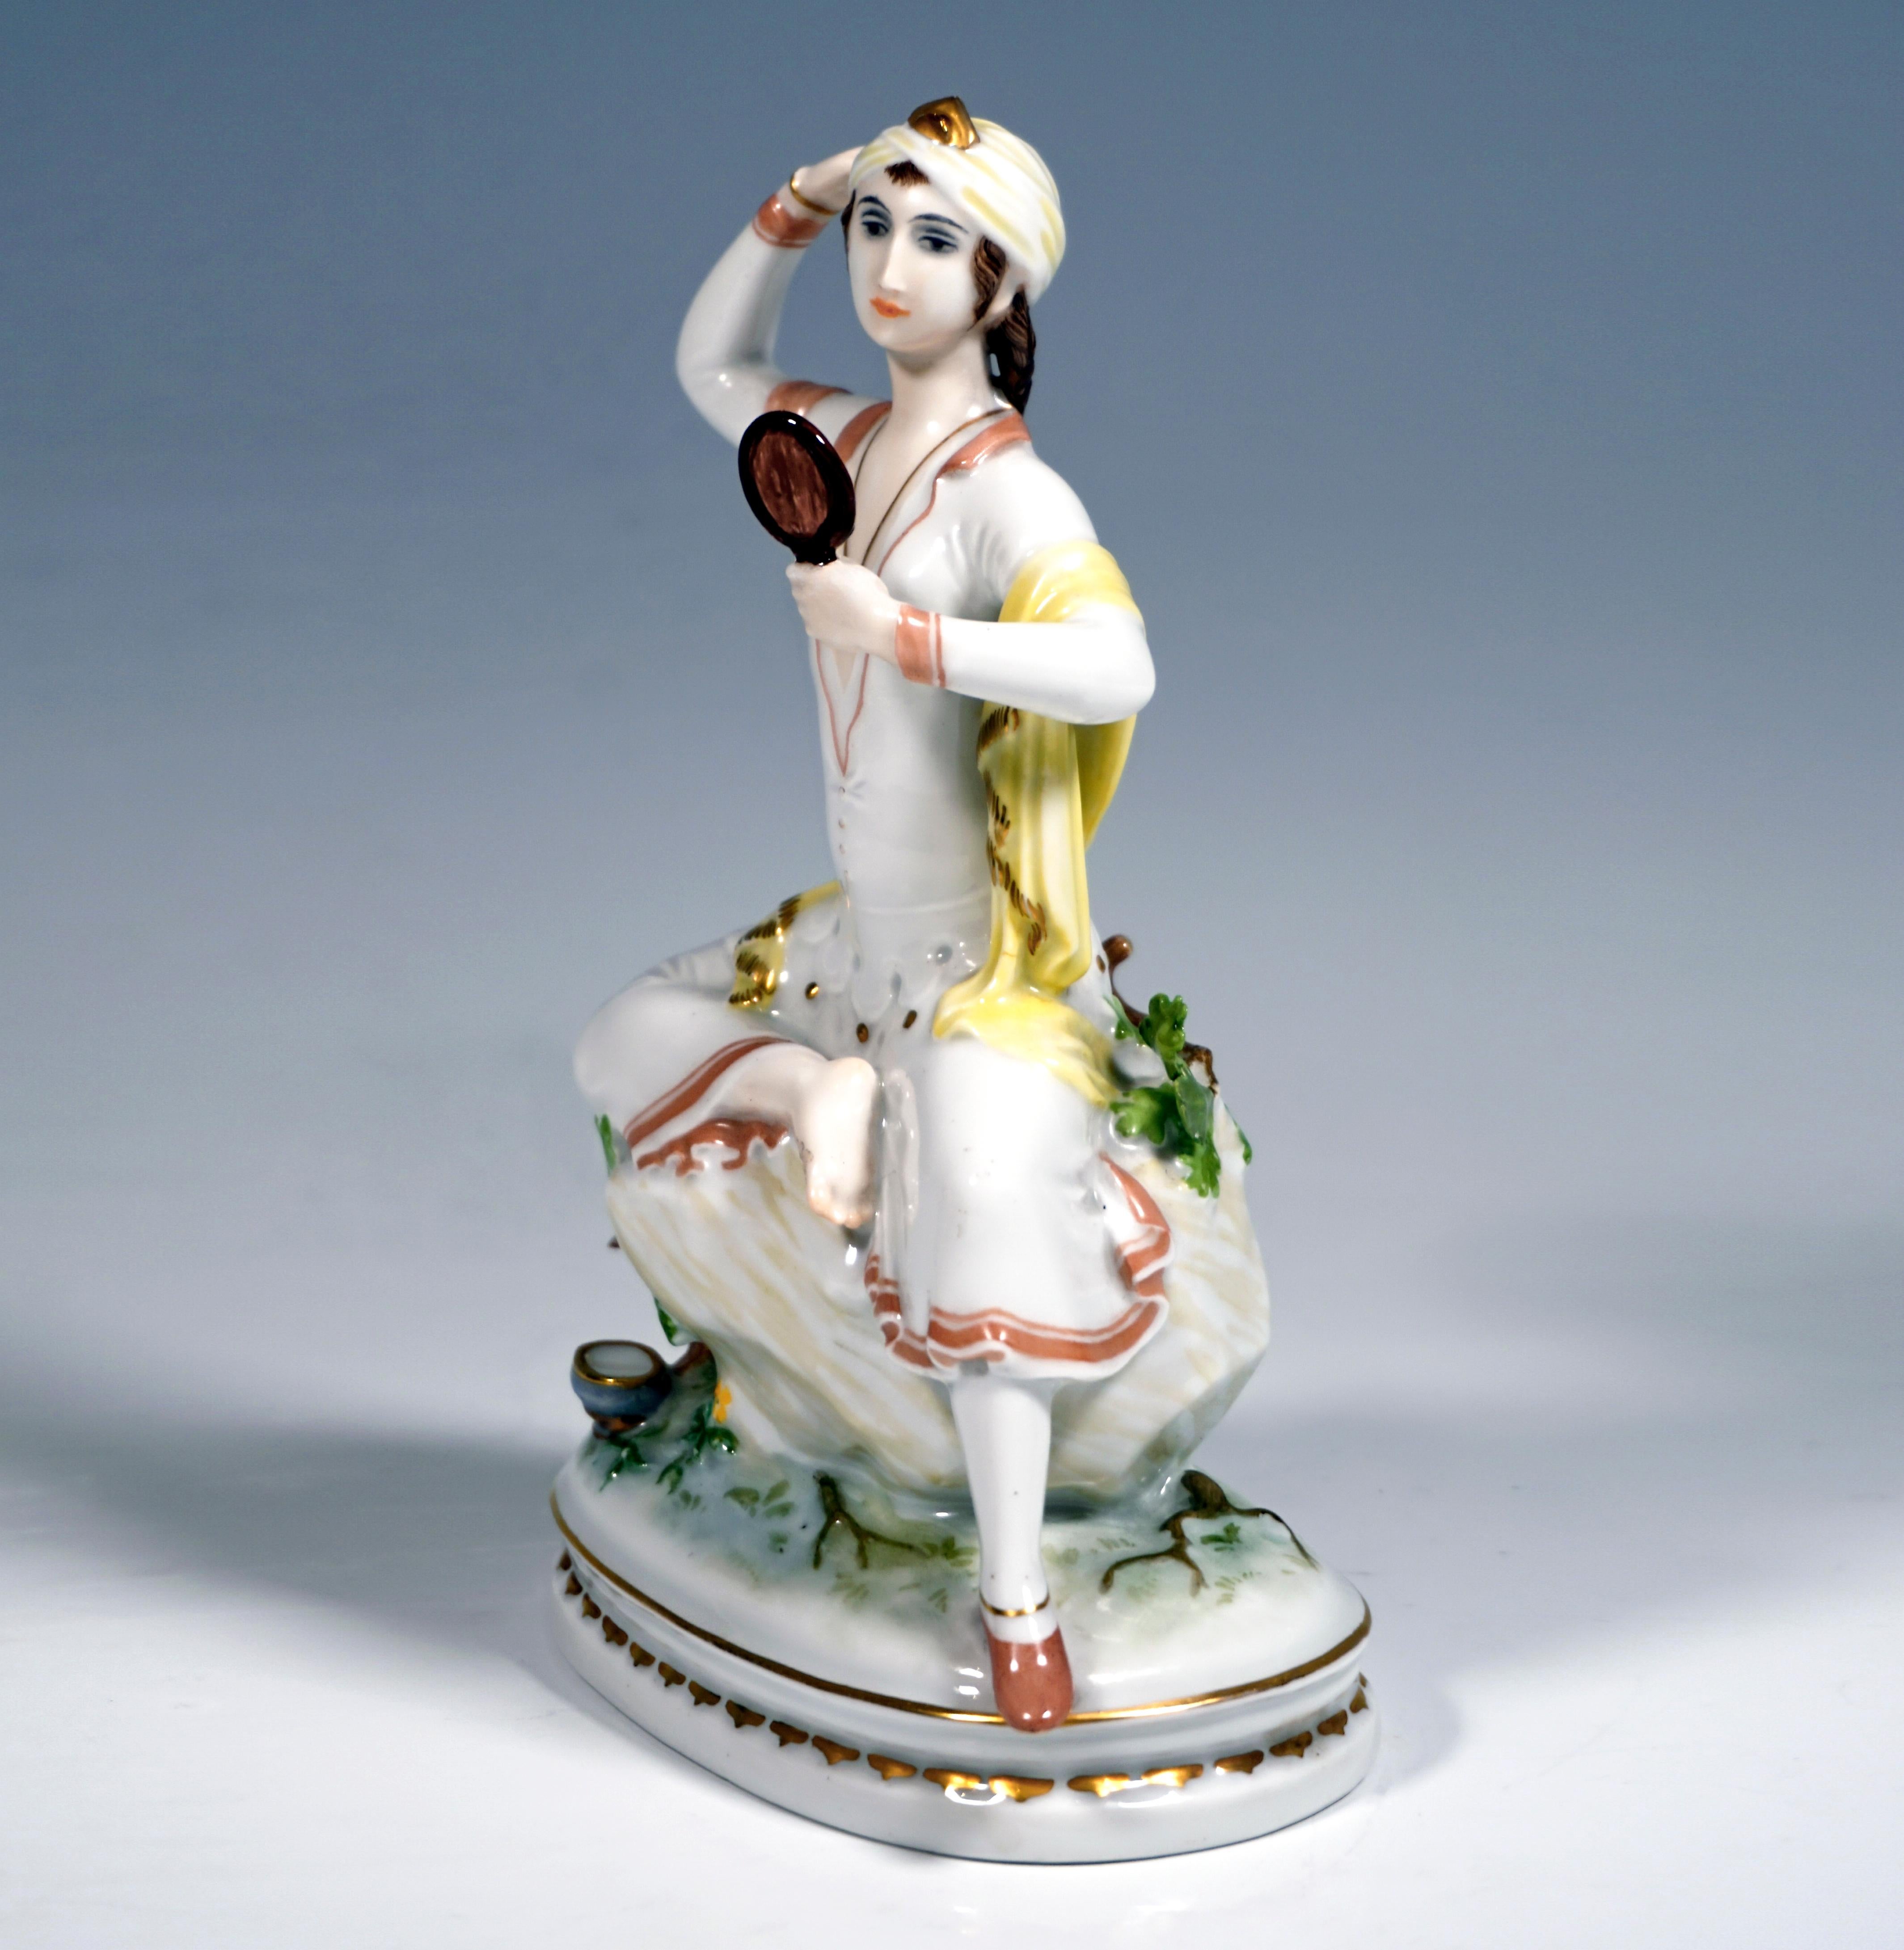 Rare Art Deco porcelain figurine of the 1920s.
Young oriental woman sitting on a rock with her leg up, looking at herself in a hand mirror and adjusting her headgear. Sparing painting of the clothes in rose and yellow with gold highlights.
The